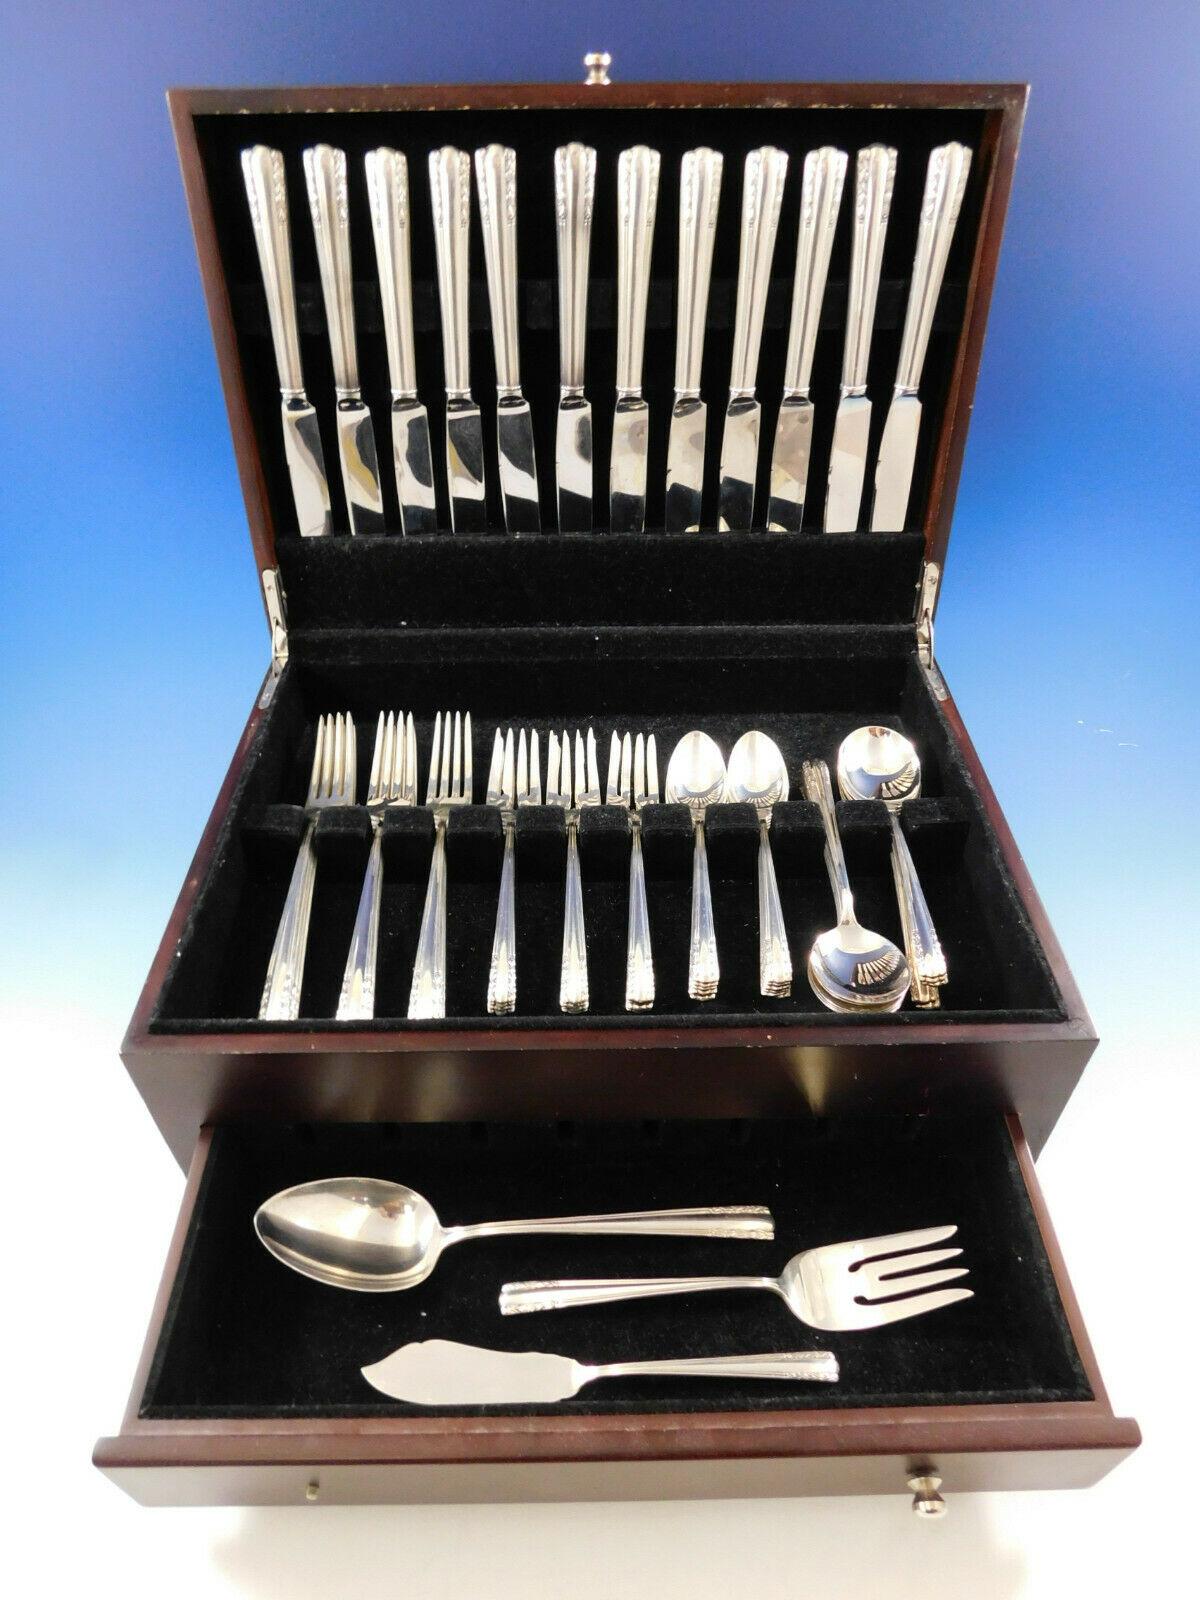 Dinner size Chapel Bells by Alvin sterling silver flatware set - 63 pieces. This set includes.

12 dinner size knives, 9 1/2